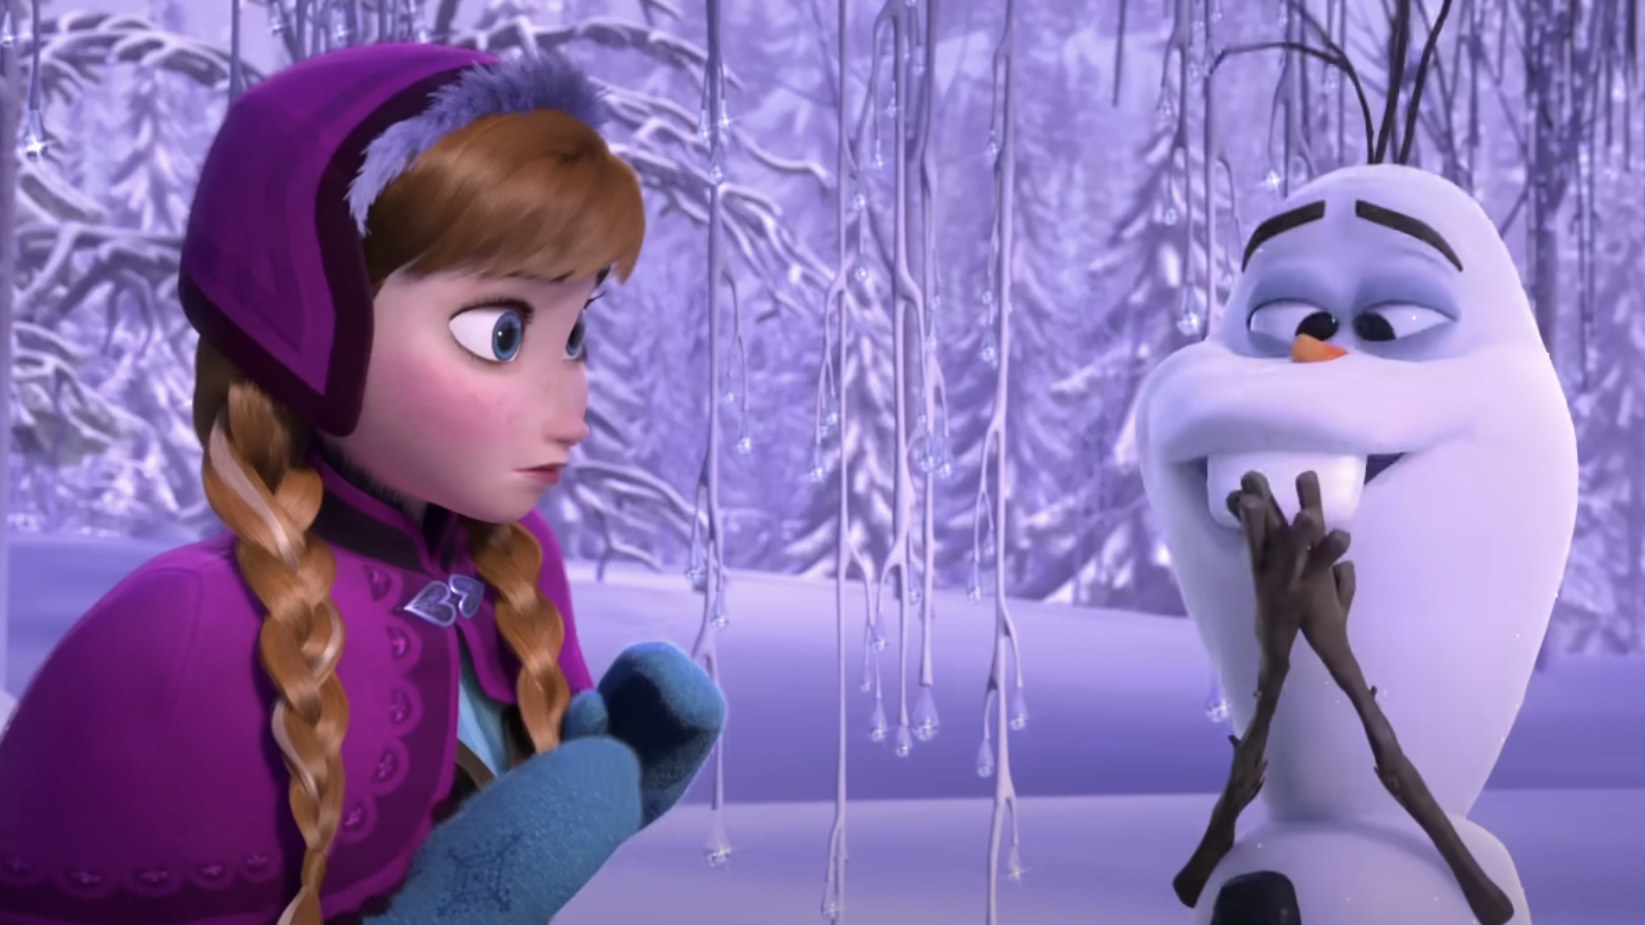 Anna looking at Olaf